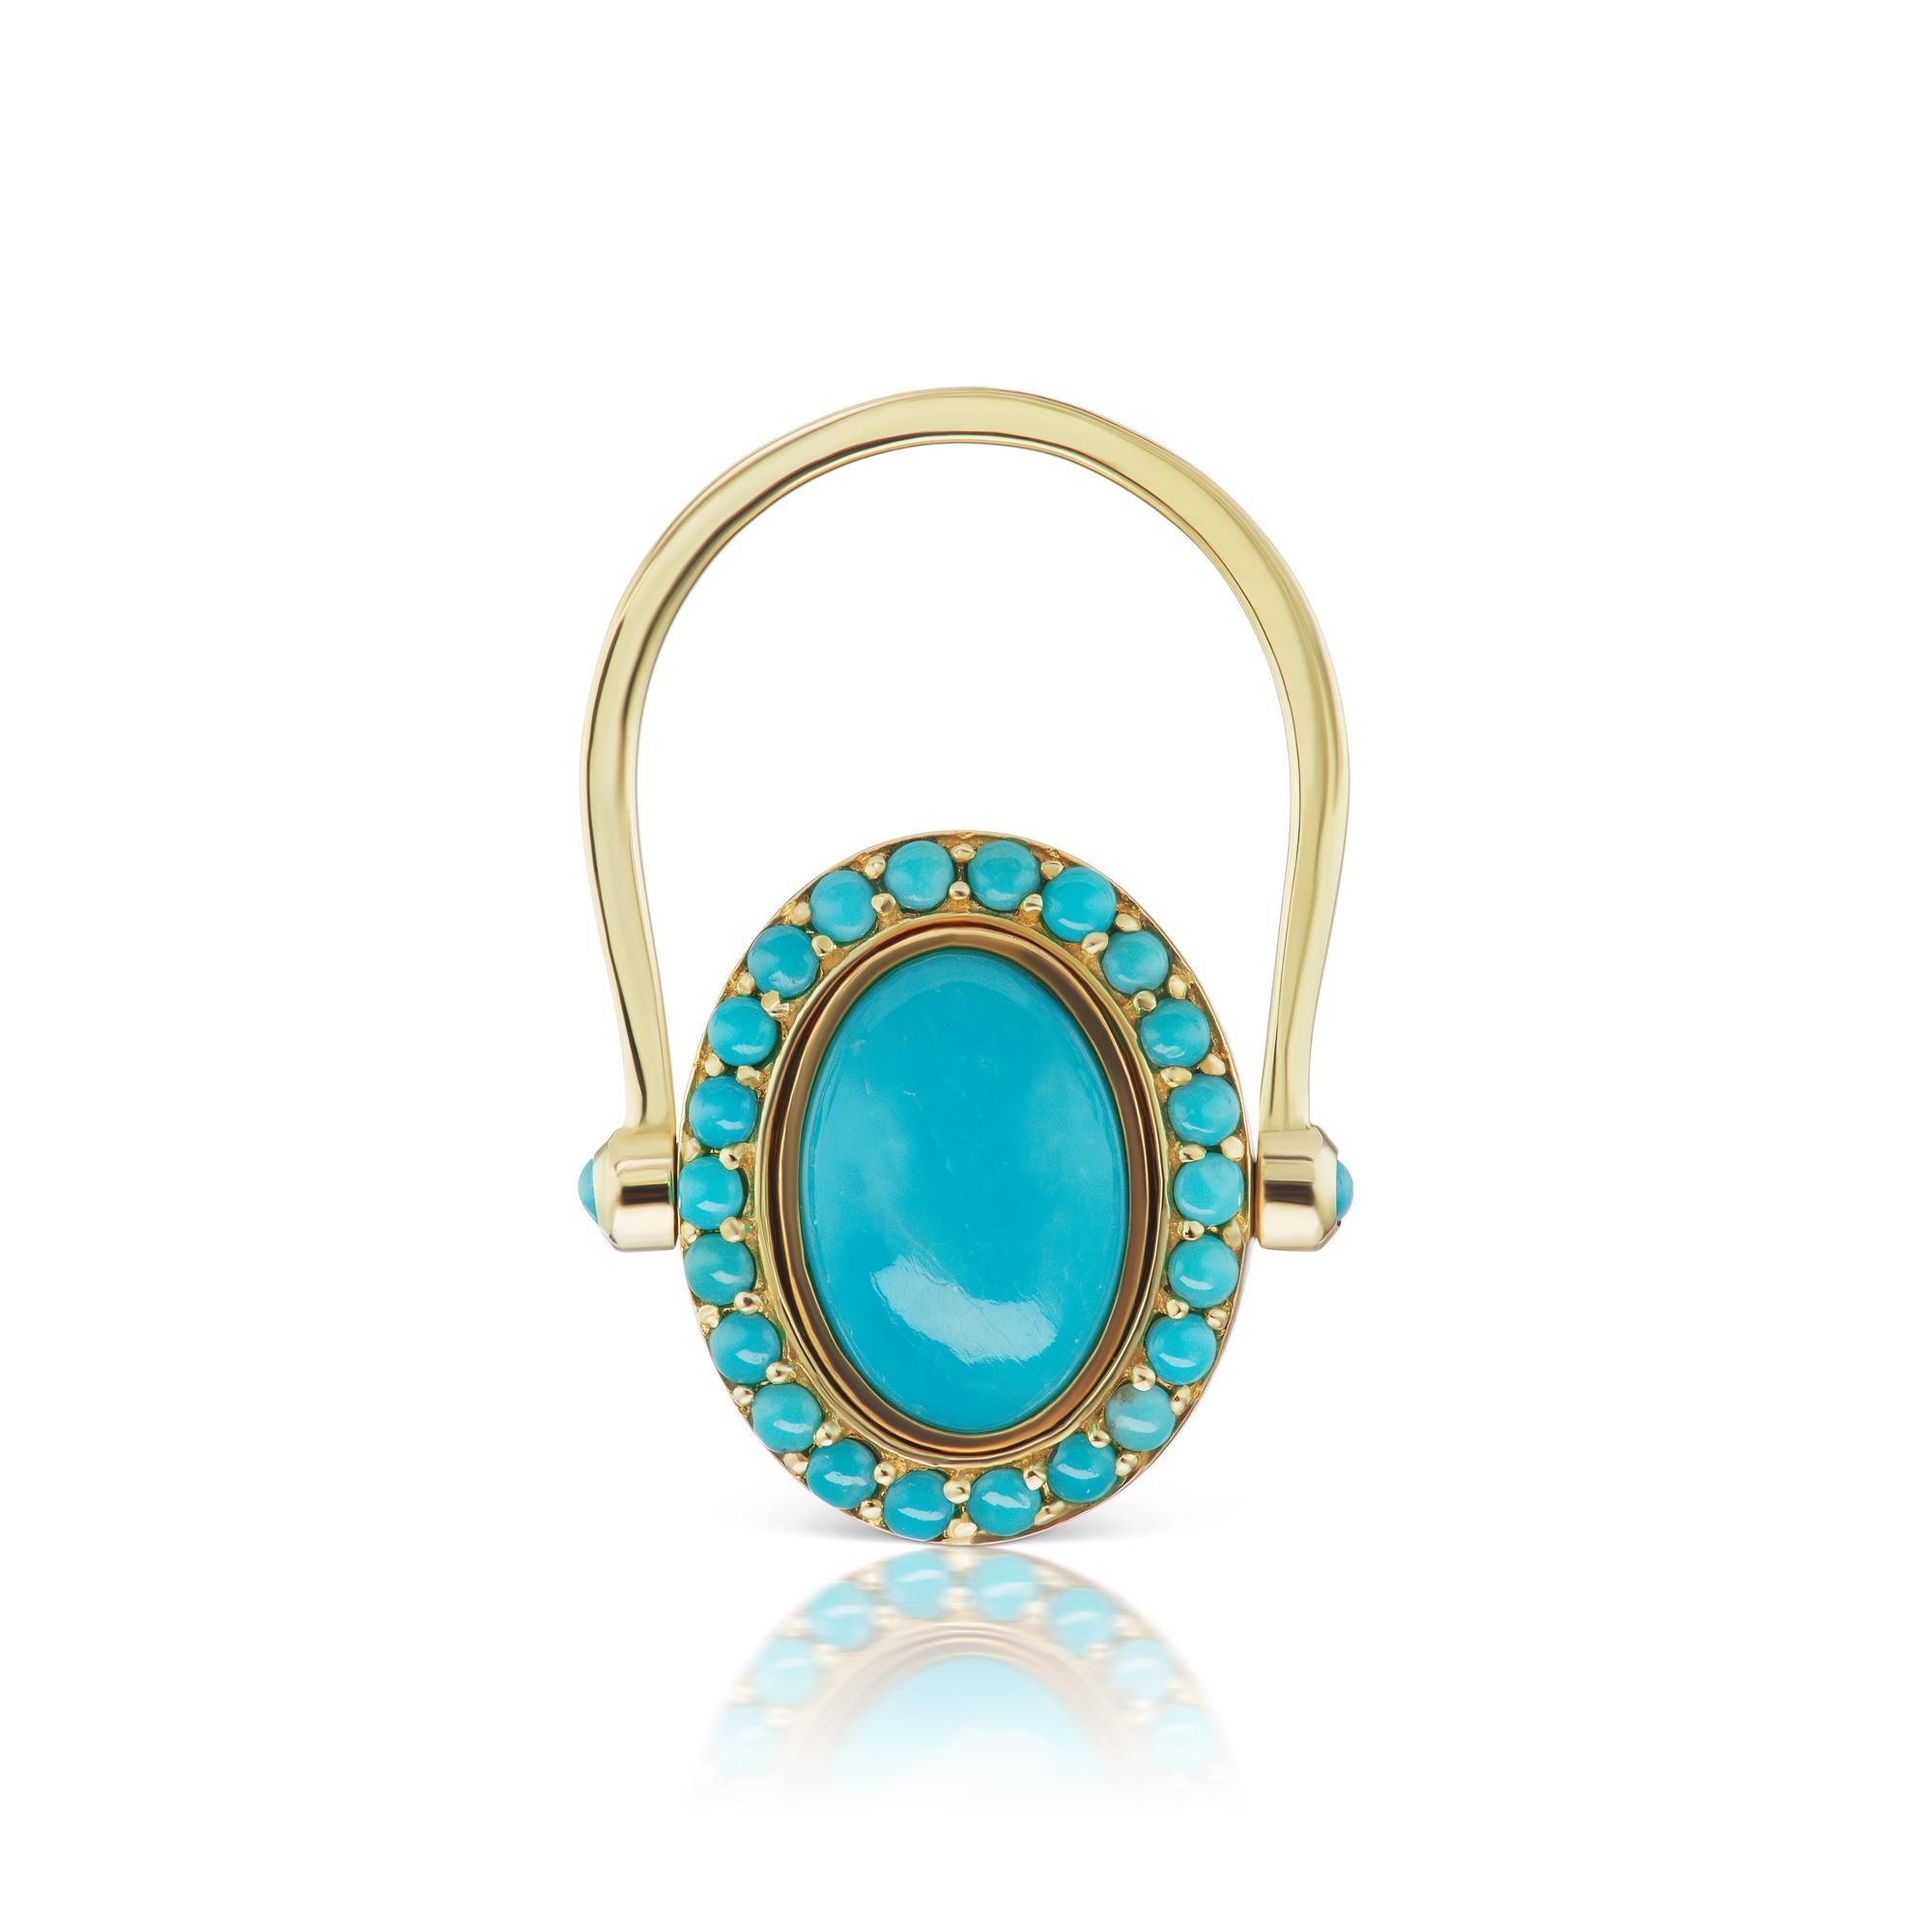 14k YG Turquoise Halo Ring with Turquoise Cabochon Center and on Shank (t.c.w. 2.56).

Vintage inspired, this color combination is an all-time favorite.  

Style Note:   This one of a kind ring is a size 6.5, and can be sized.